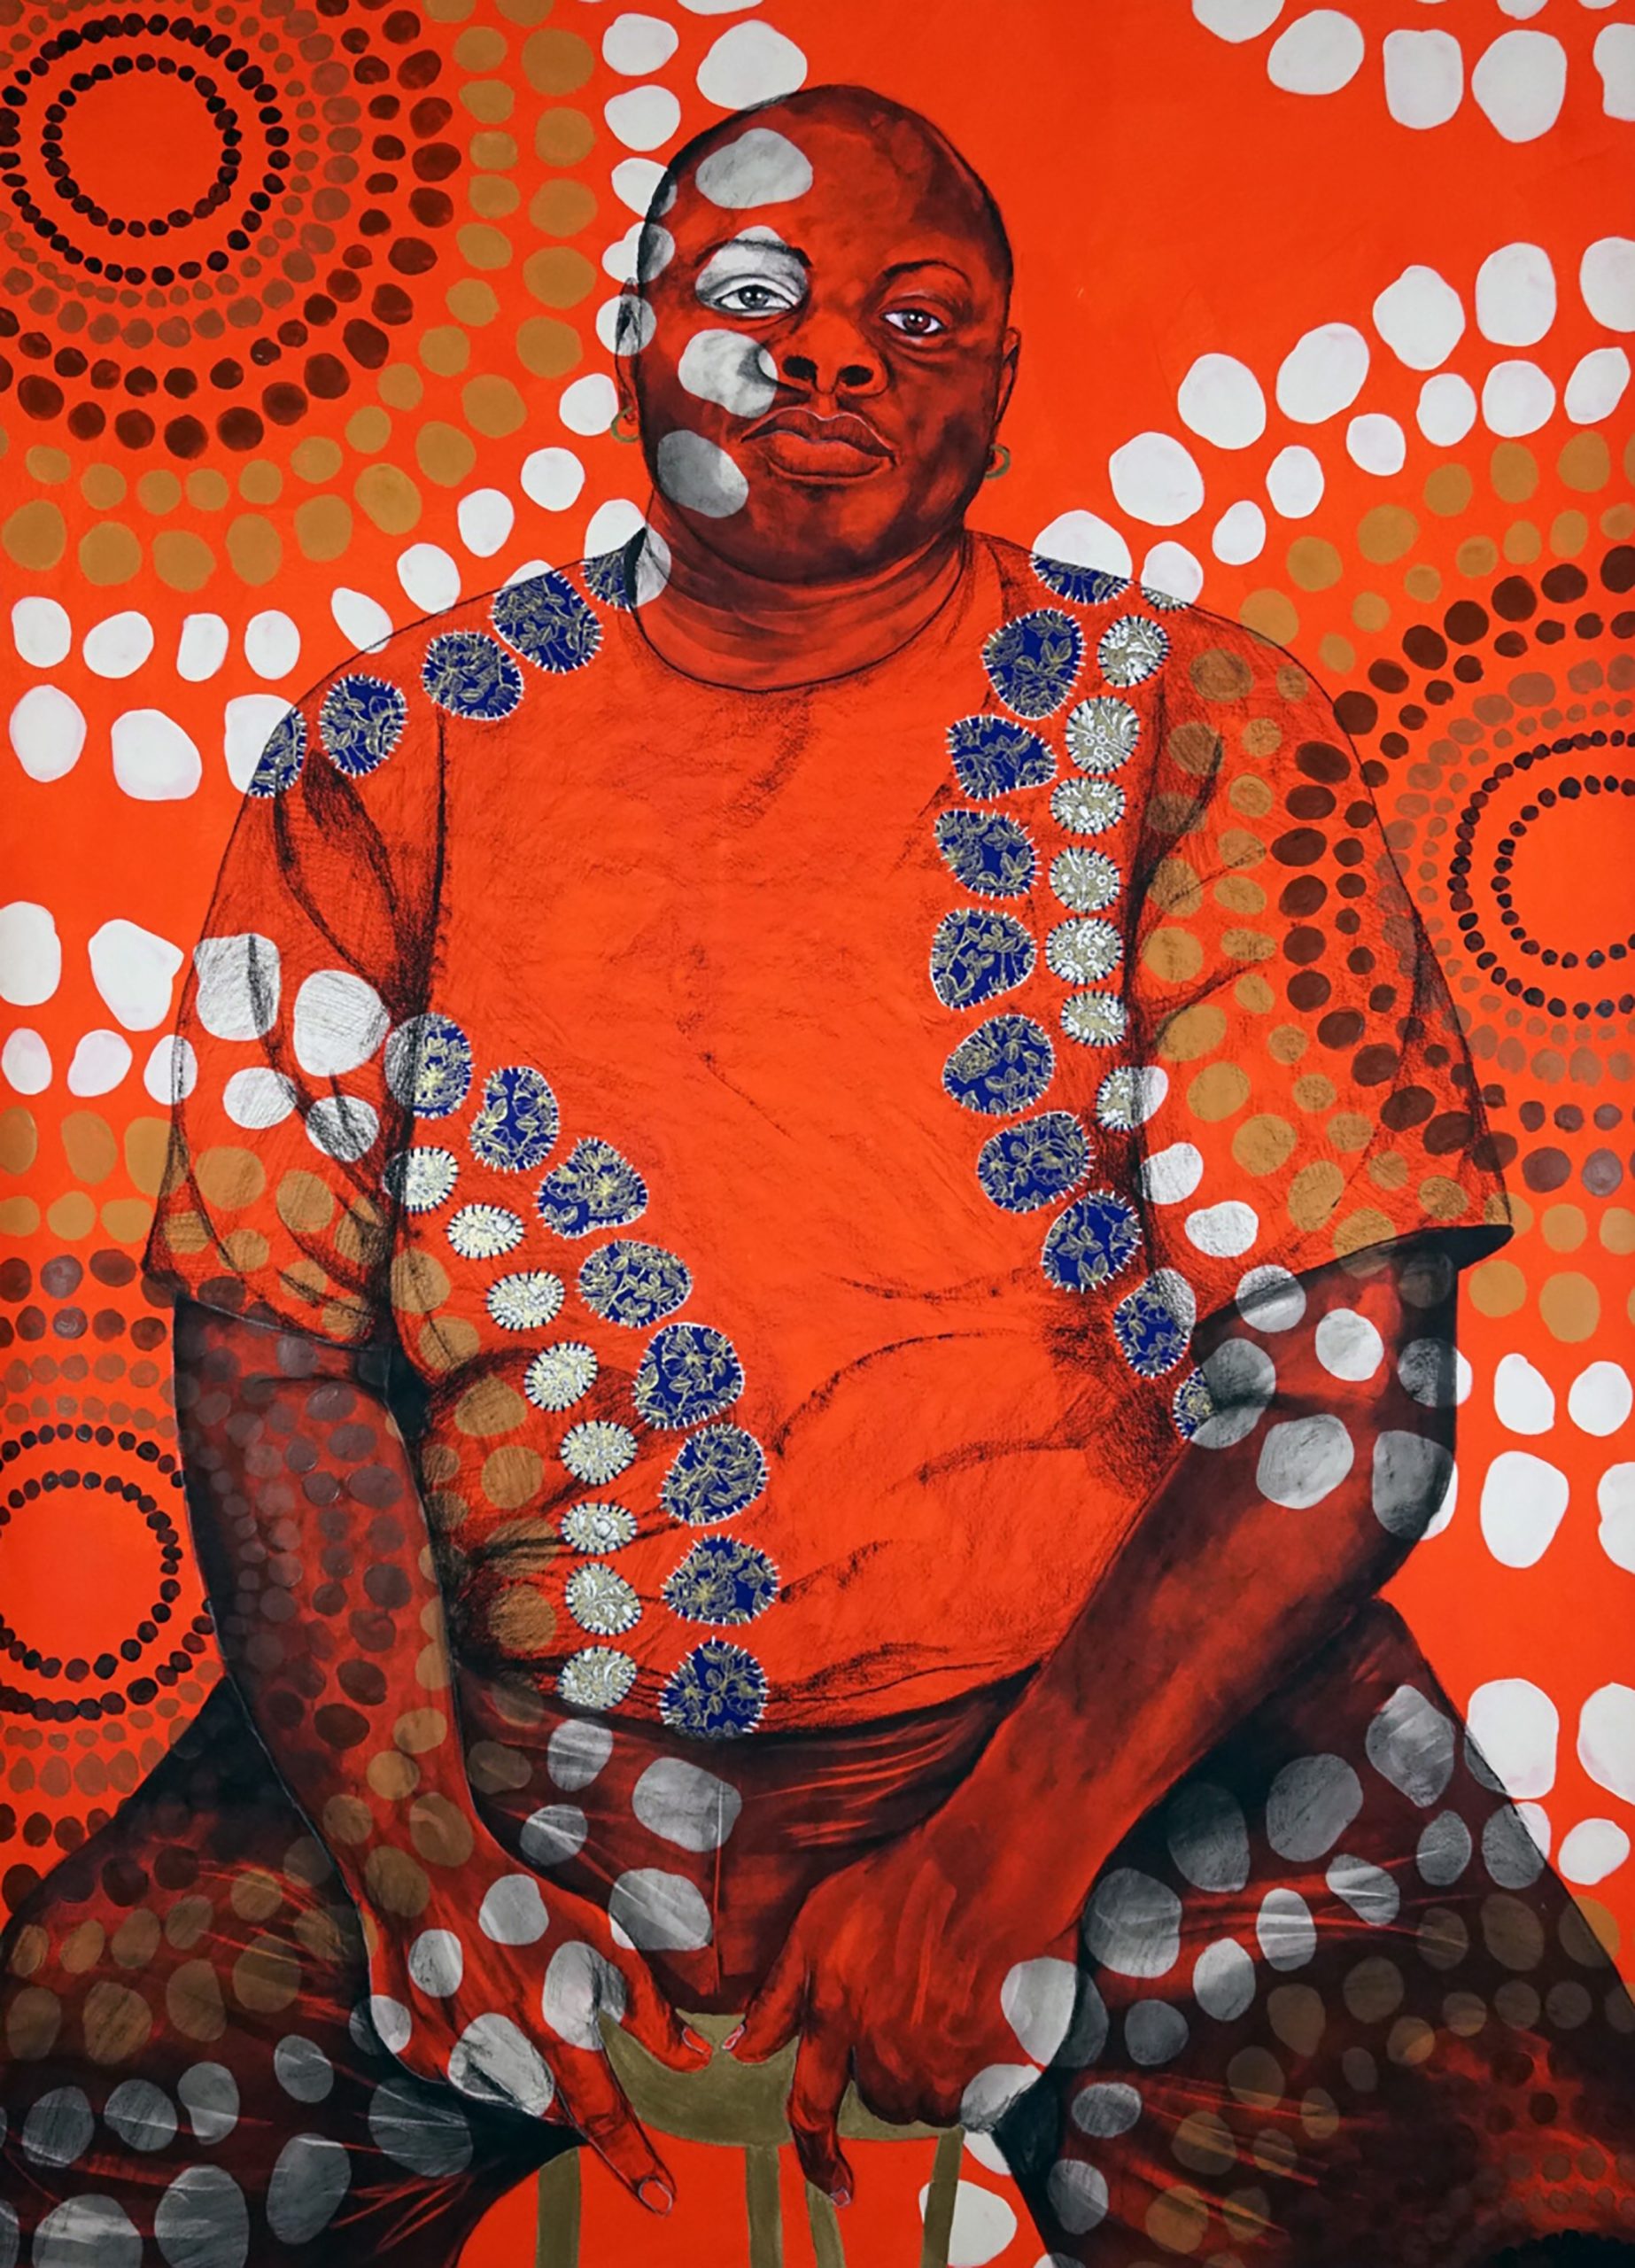 Mixed-media work of a seated dark skin person staring confidently at the viewer; an overlay of bright orange and circular patterns of white, blue, and brown circles covers the person and background.